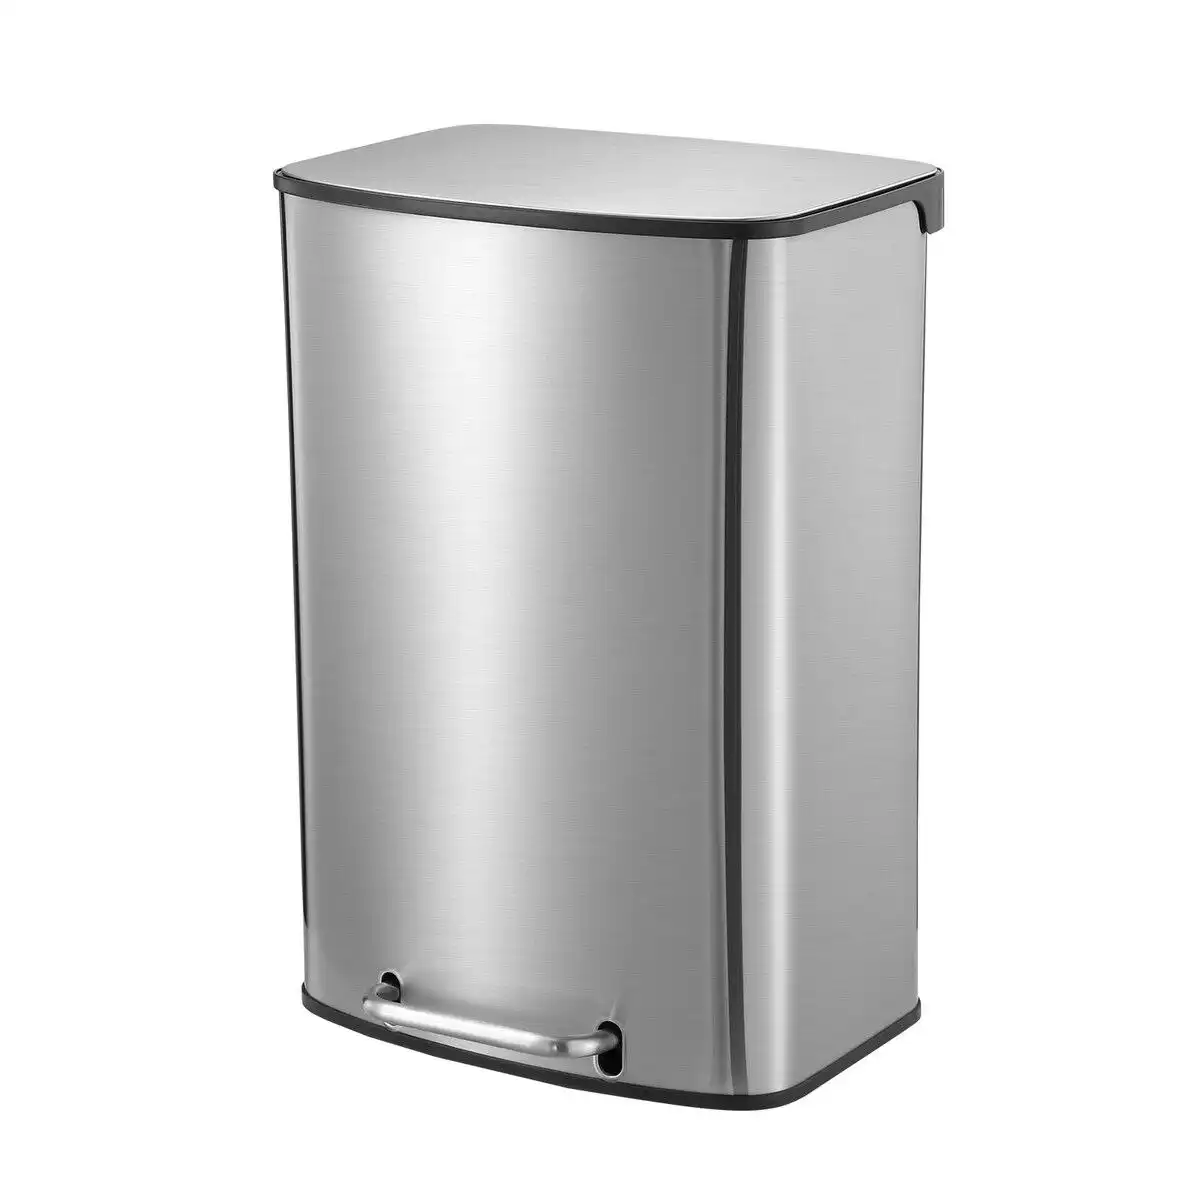 Maxkon 50L Pedal Bin Garbage Can Rubbish Recycling Trash Waste Stainless Steel Rectangular Trashcan Soft Closing Lid Kitchen House Indoor Office